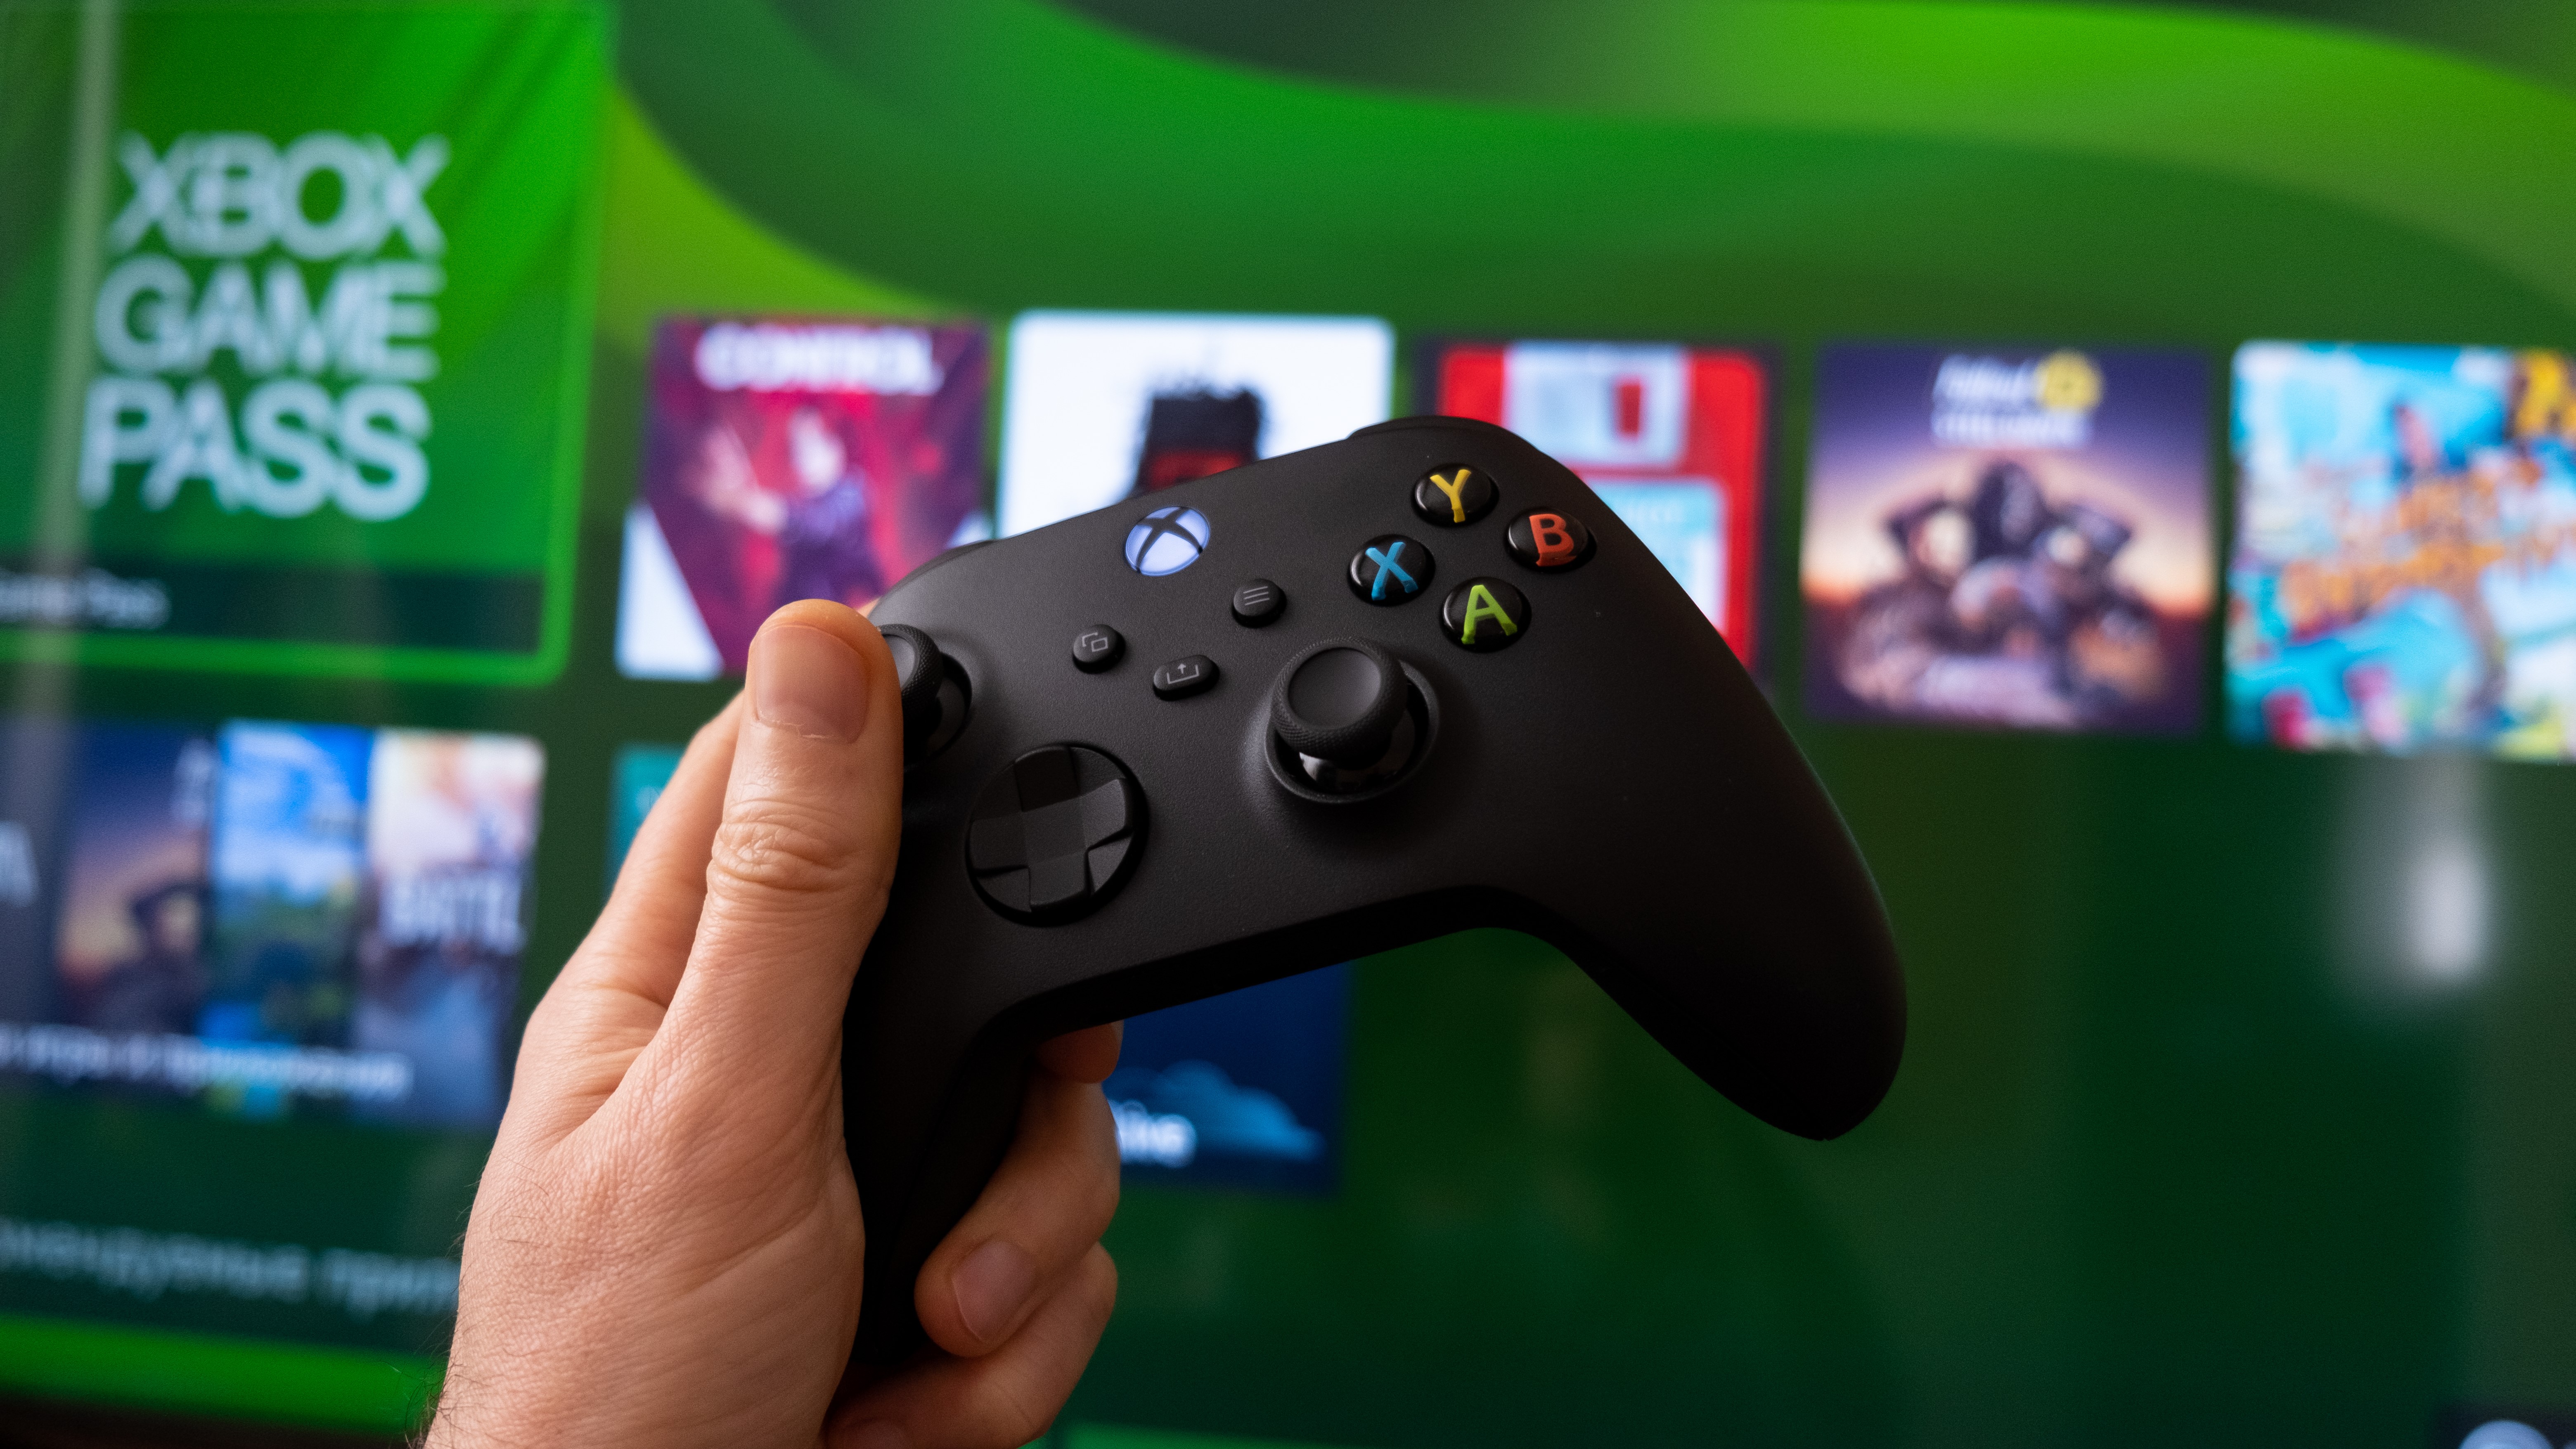 Image of Xbox controller and Xbox Game Pass